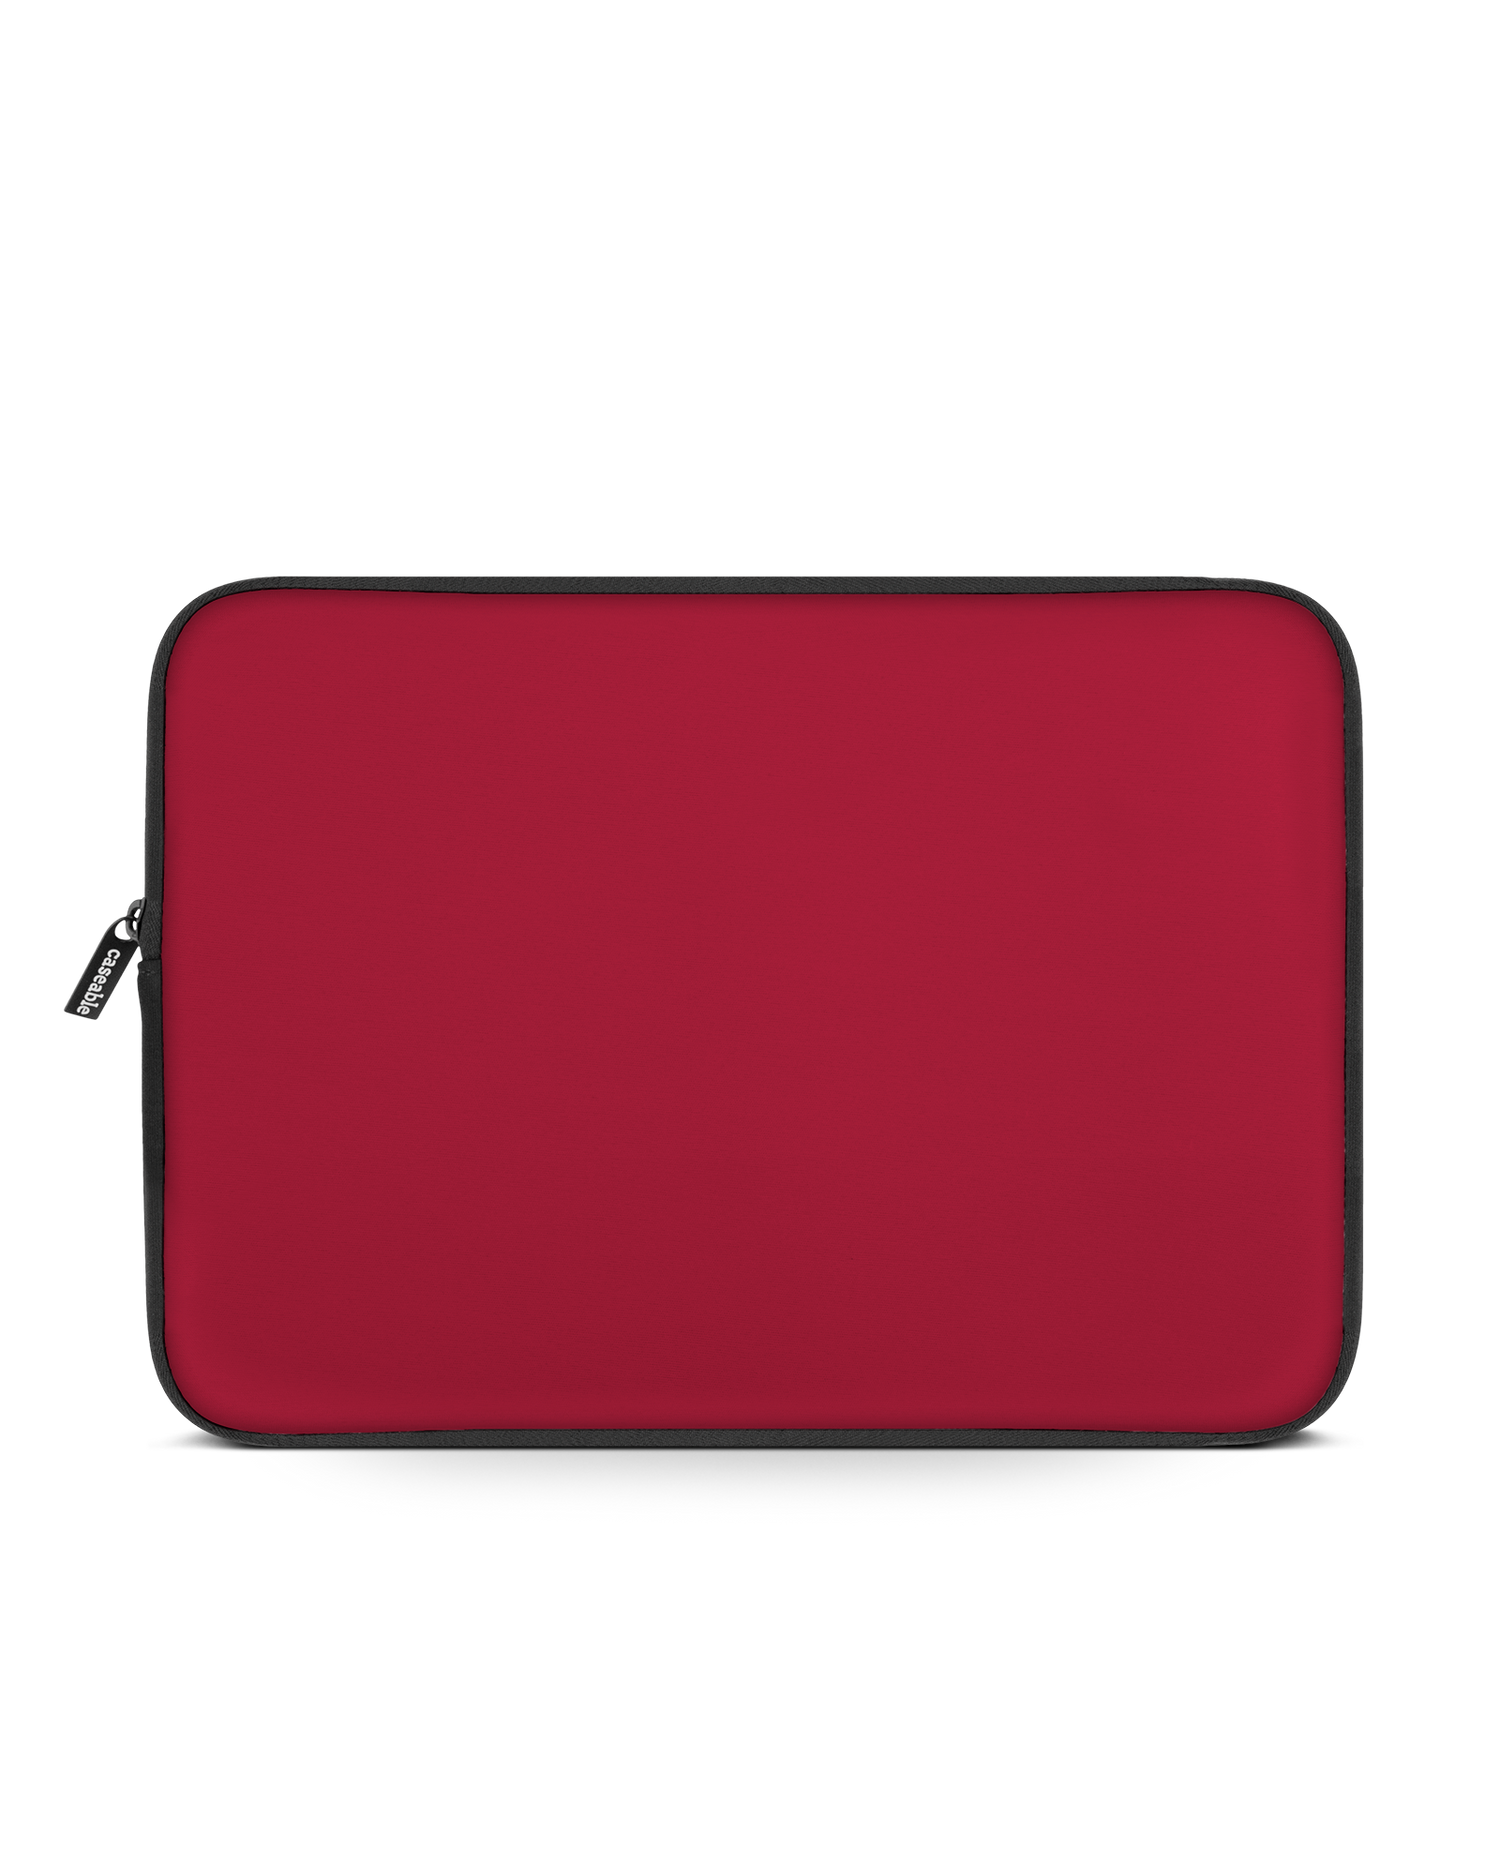 RED Laptop Case 16 inch: Front View